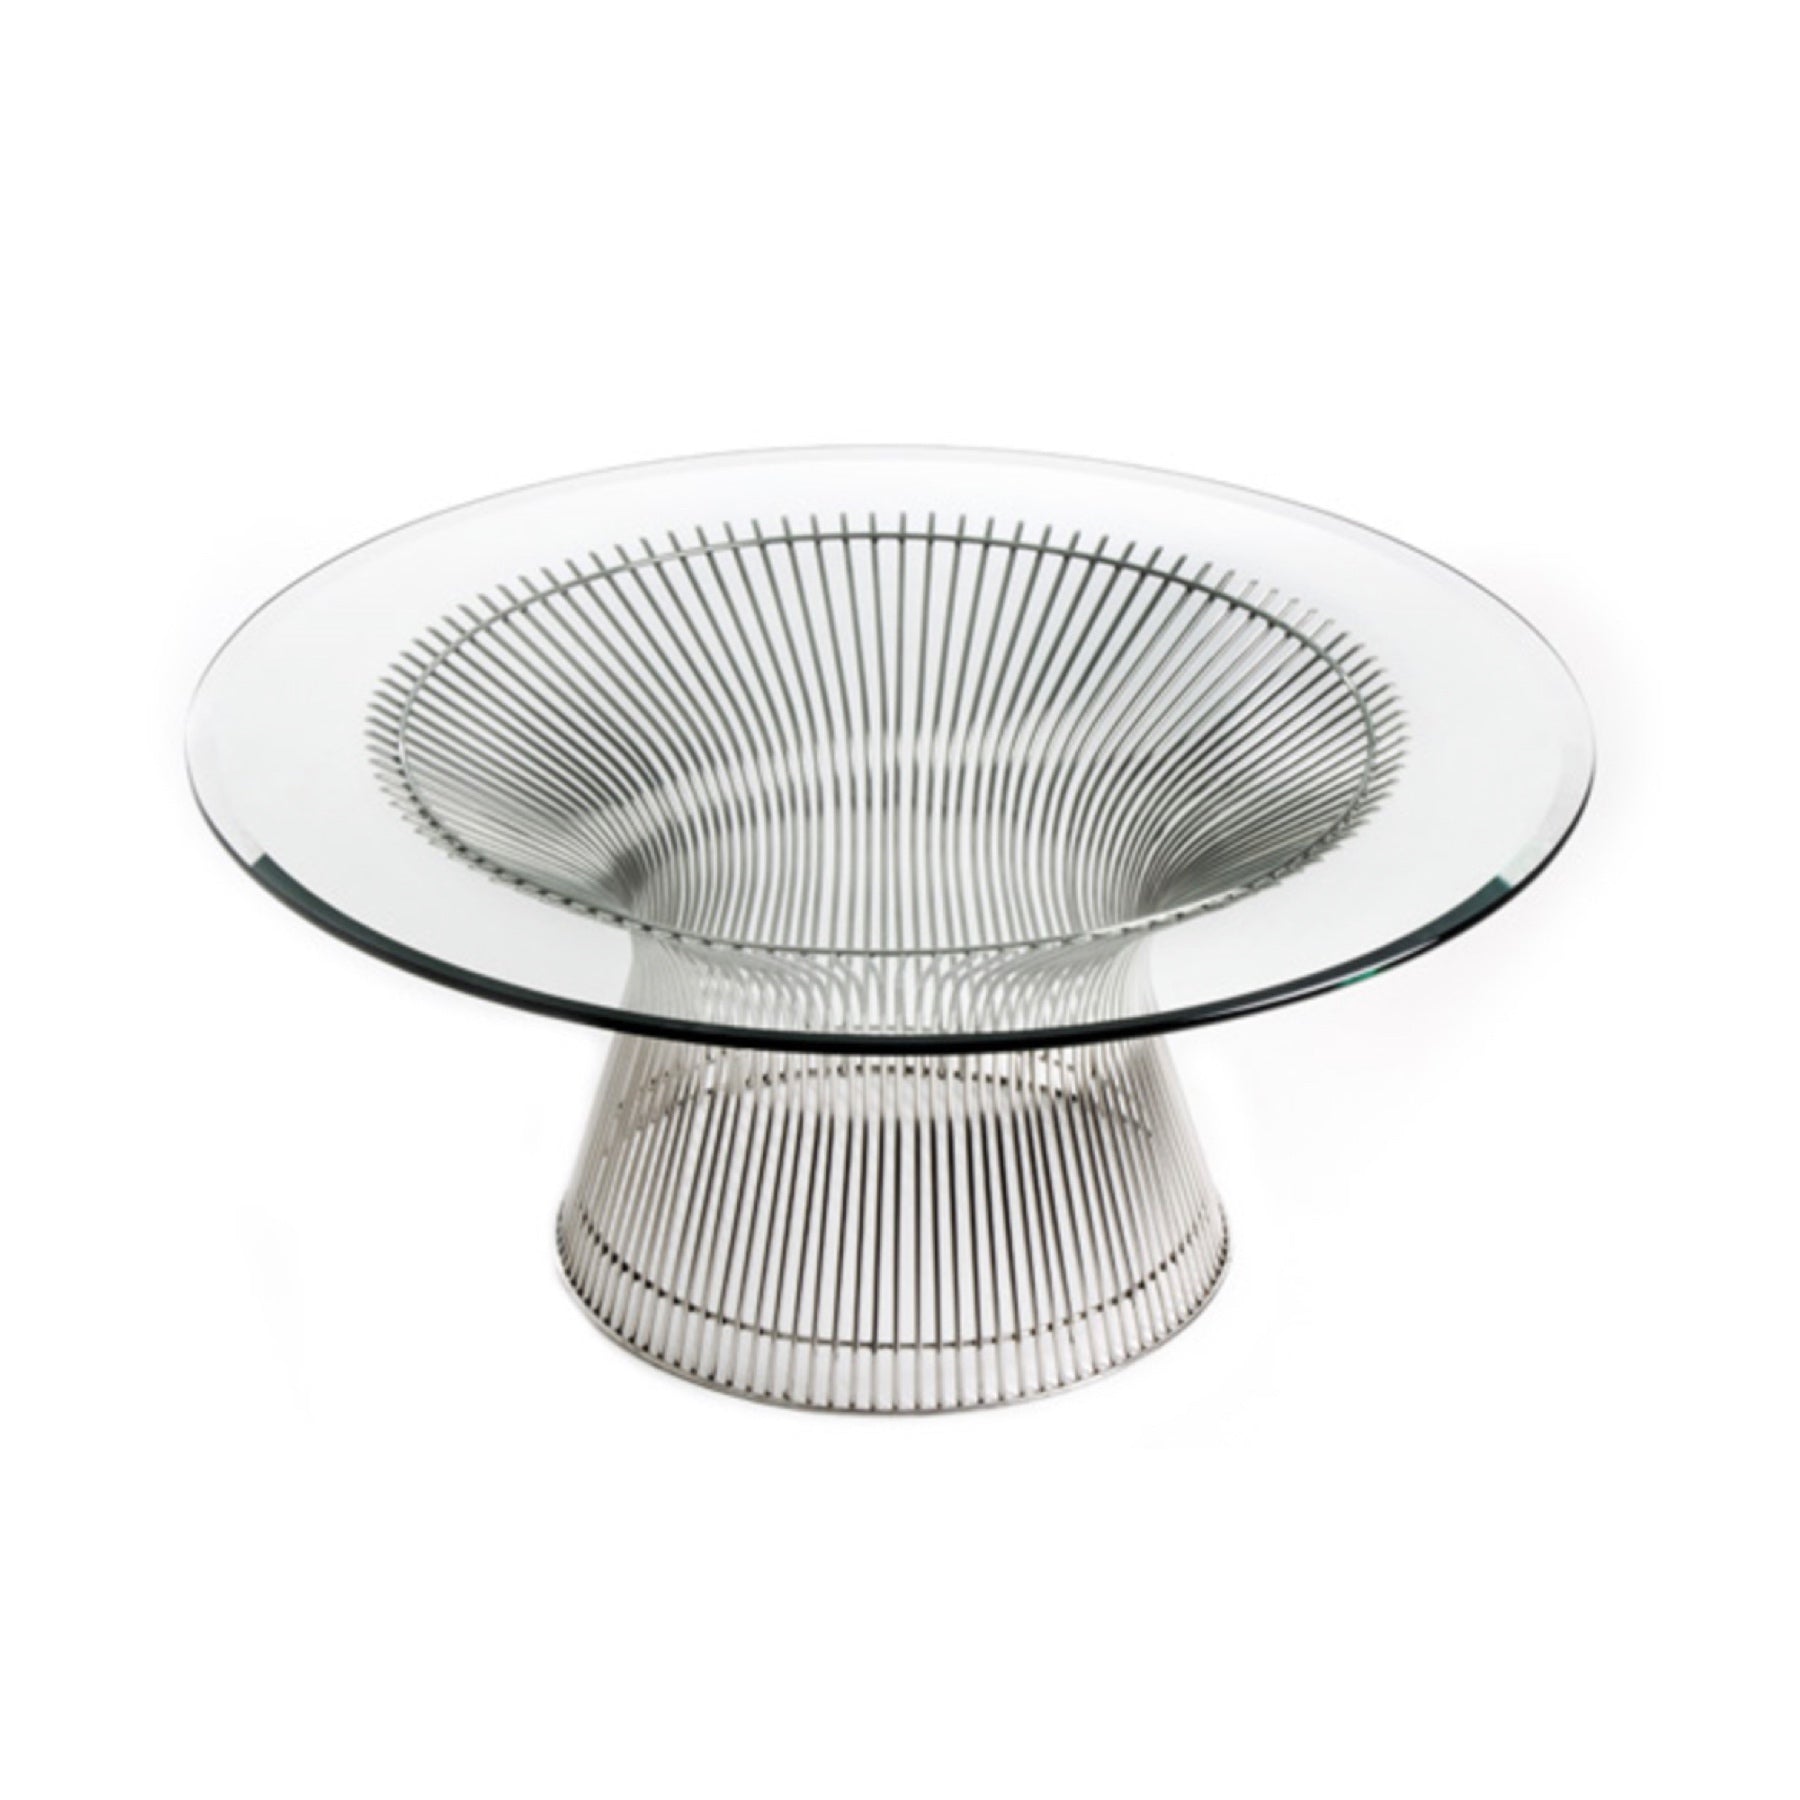 TR45008 Platner style tables